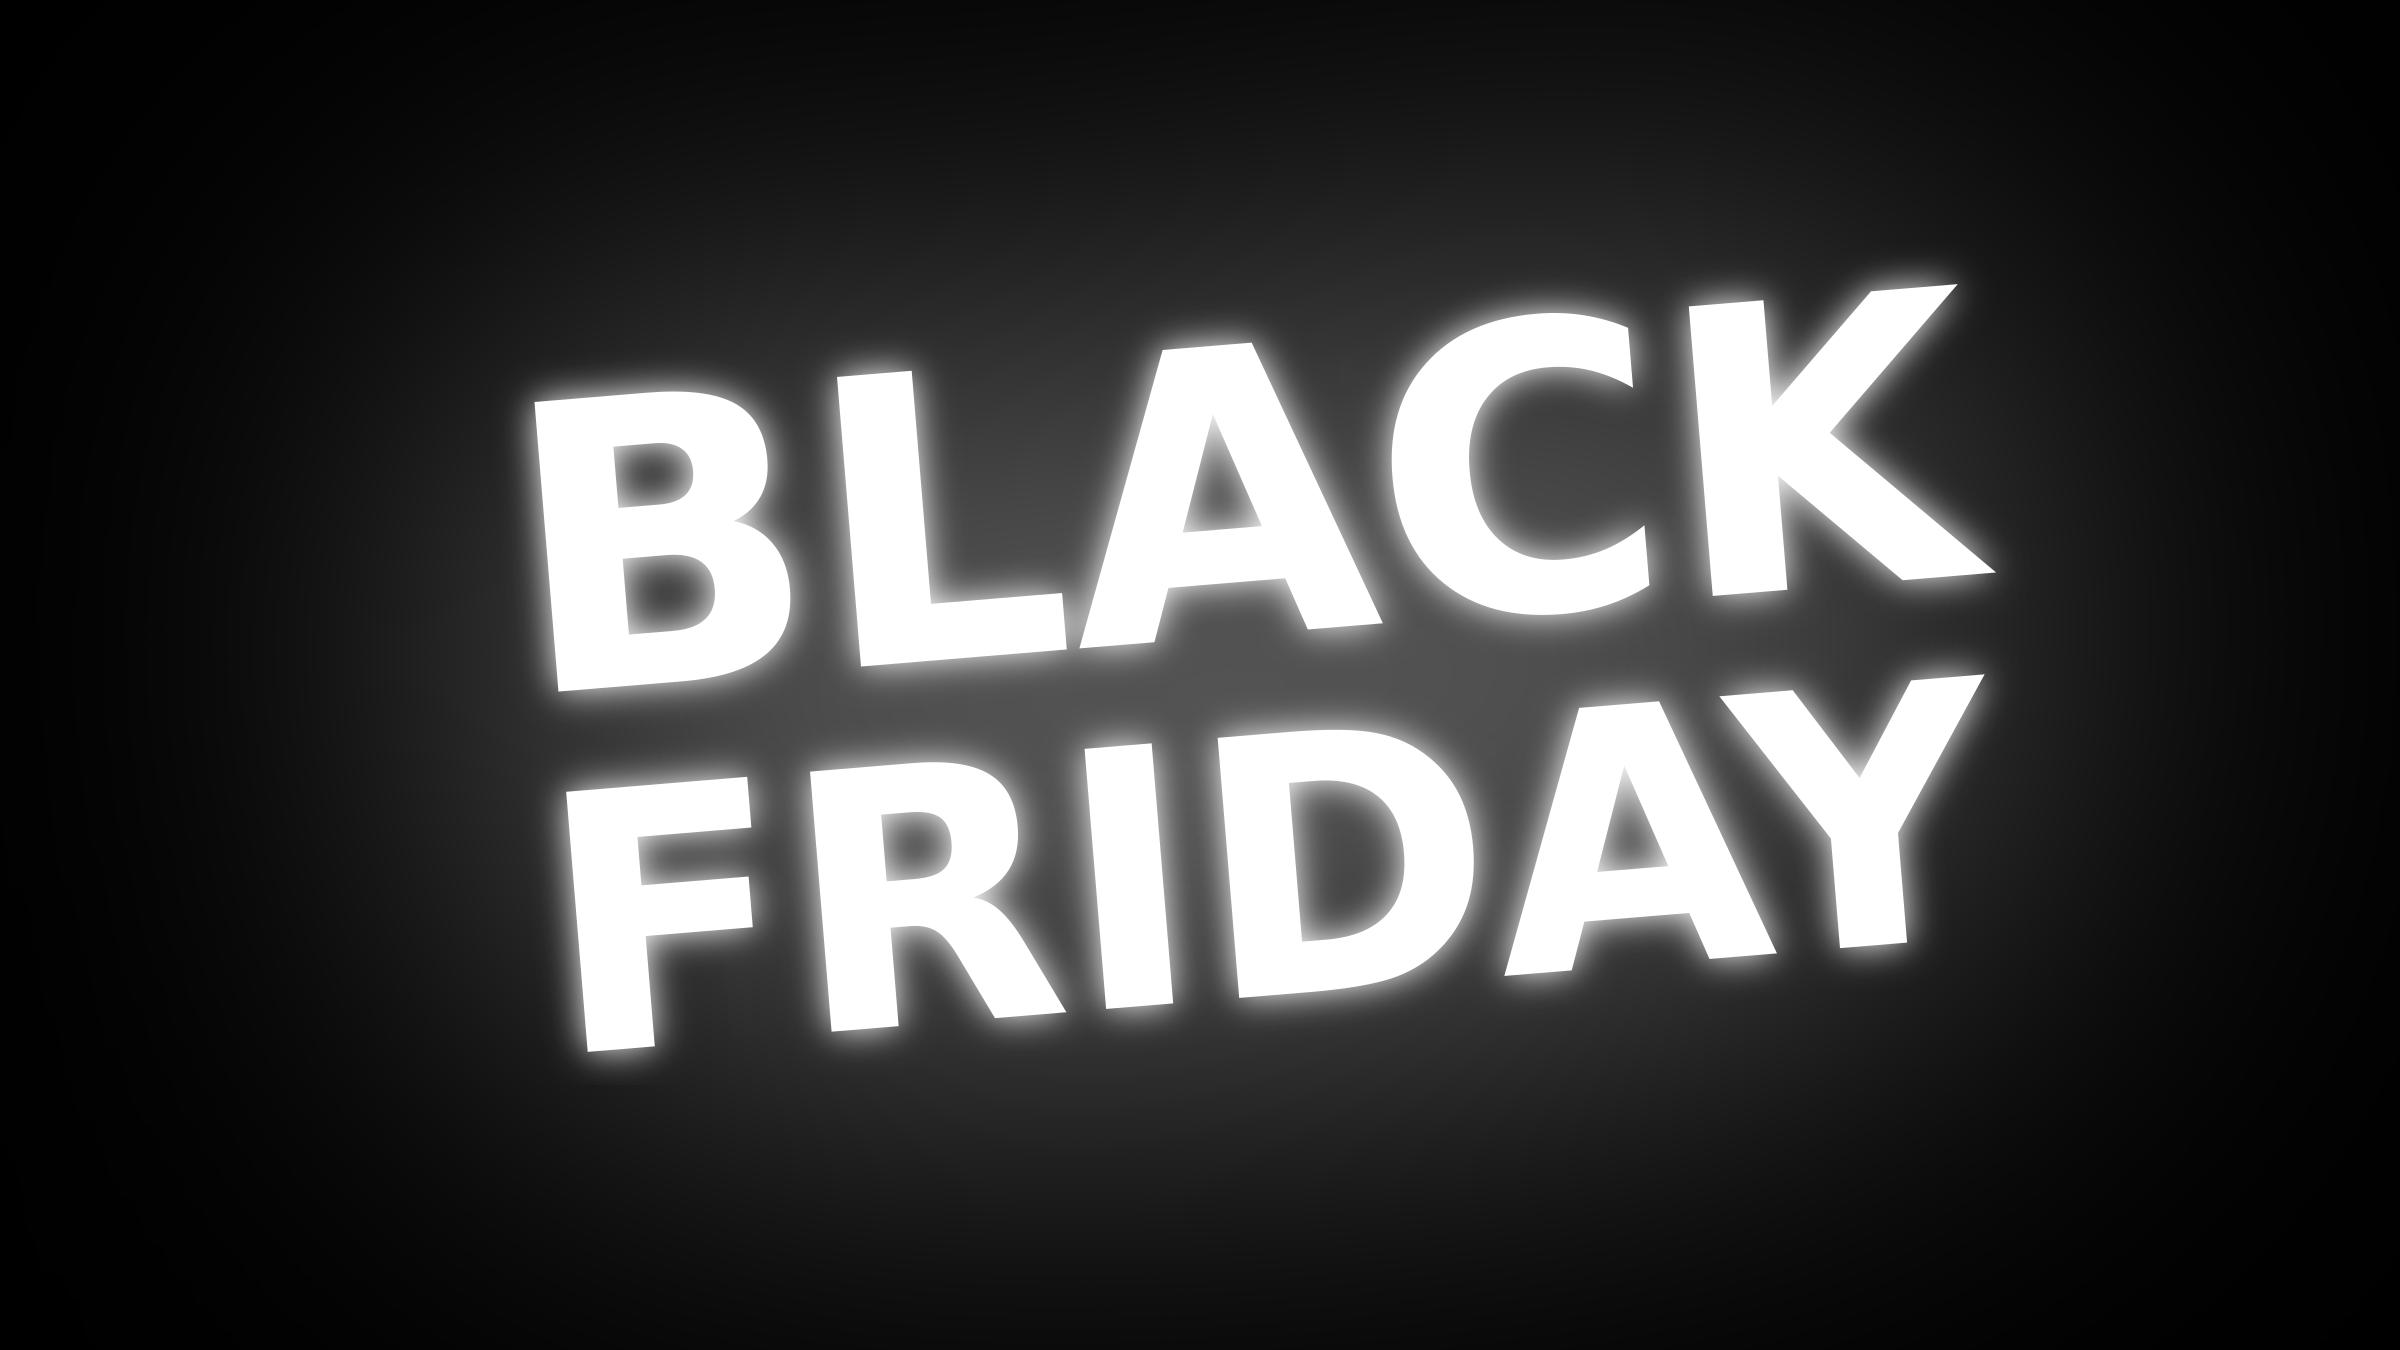 Black Friday Text with White Glow 16:9 png